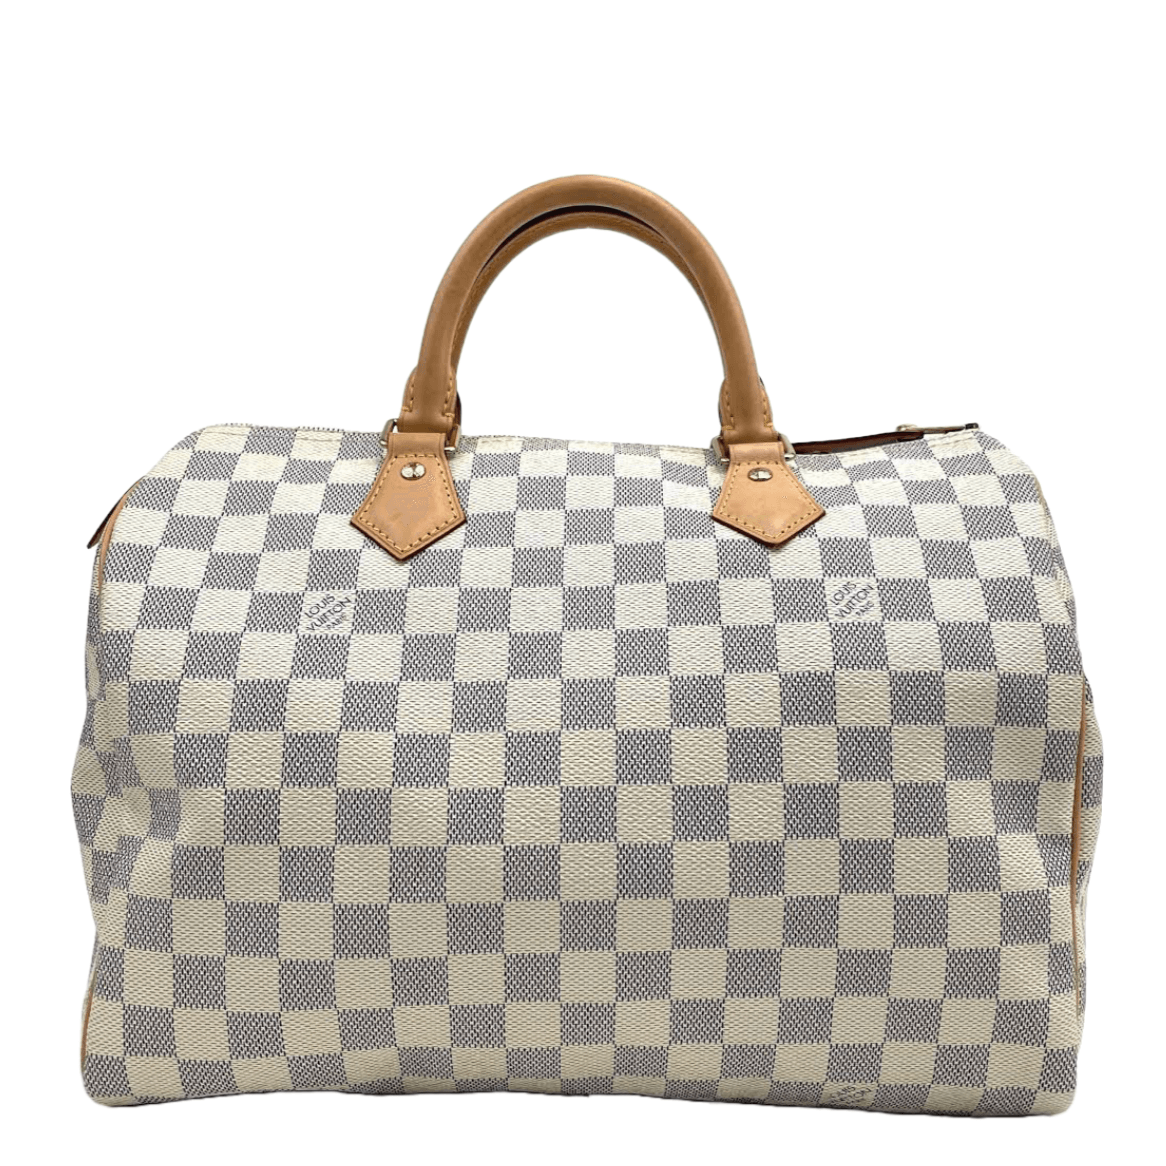 Which Louis Vuitton Speedy you should buy?